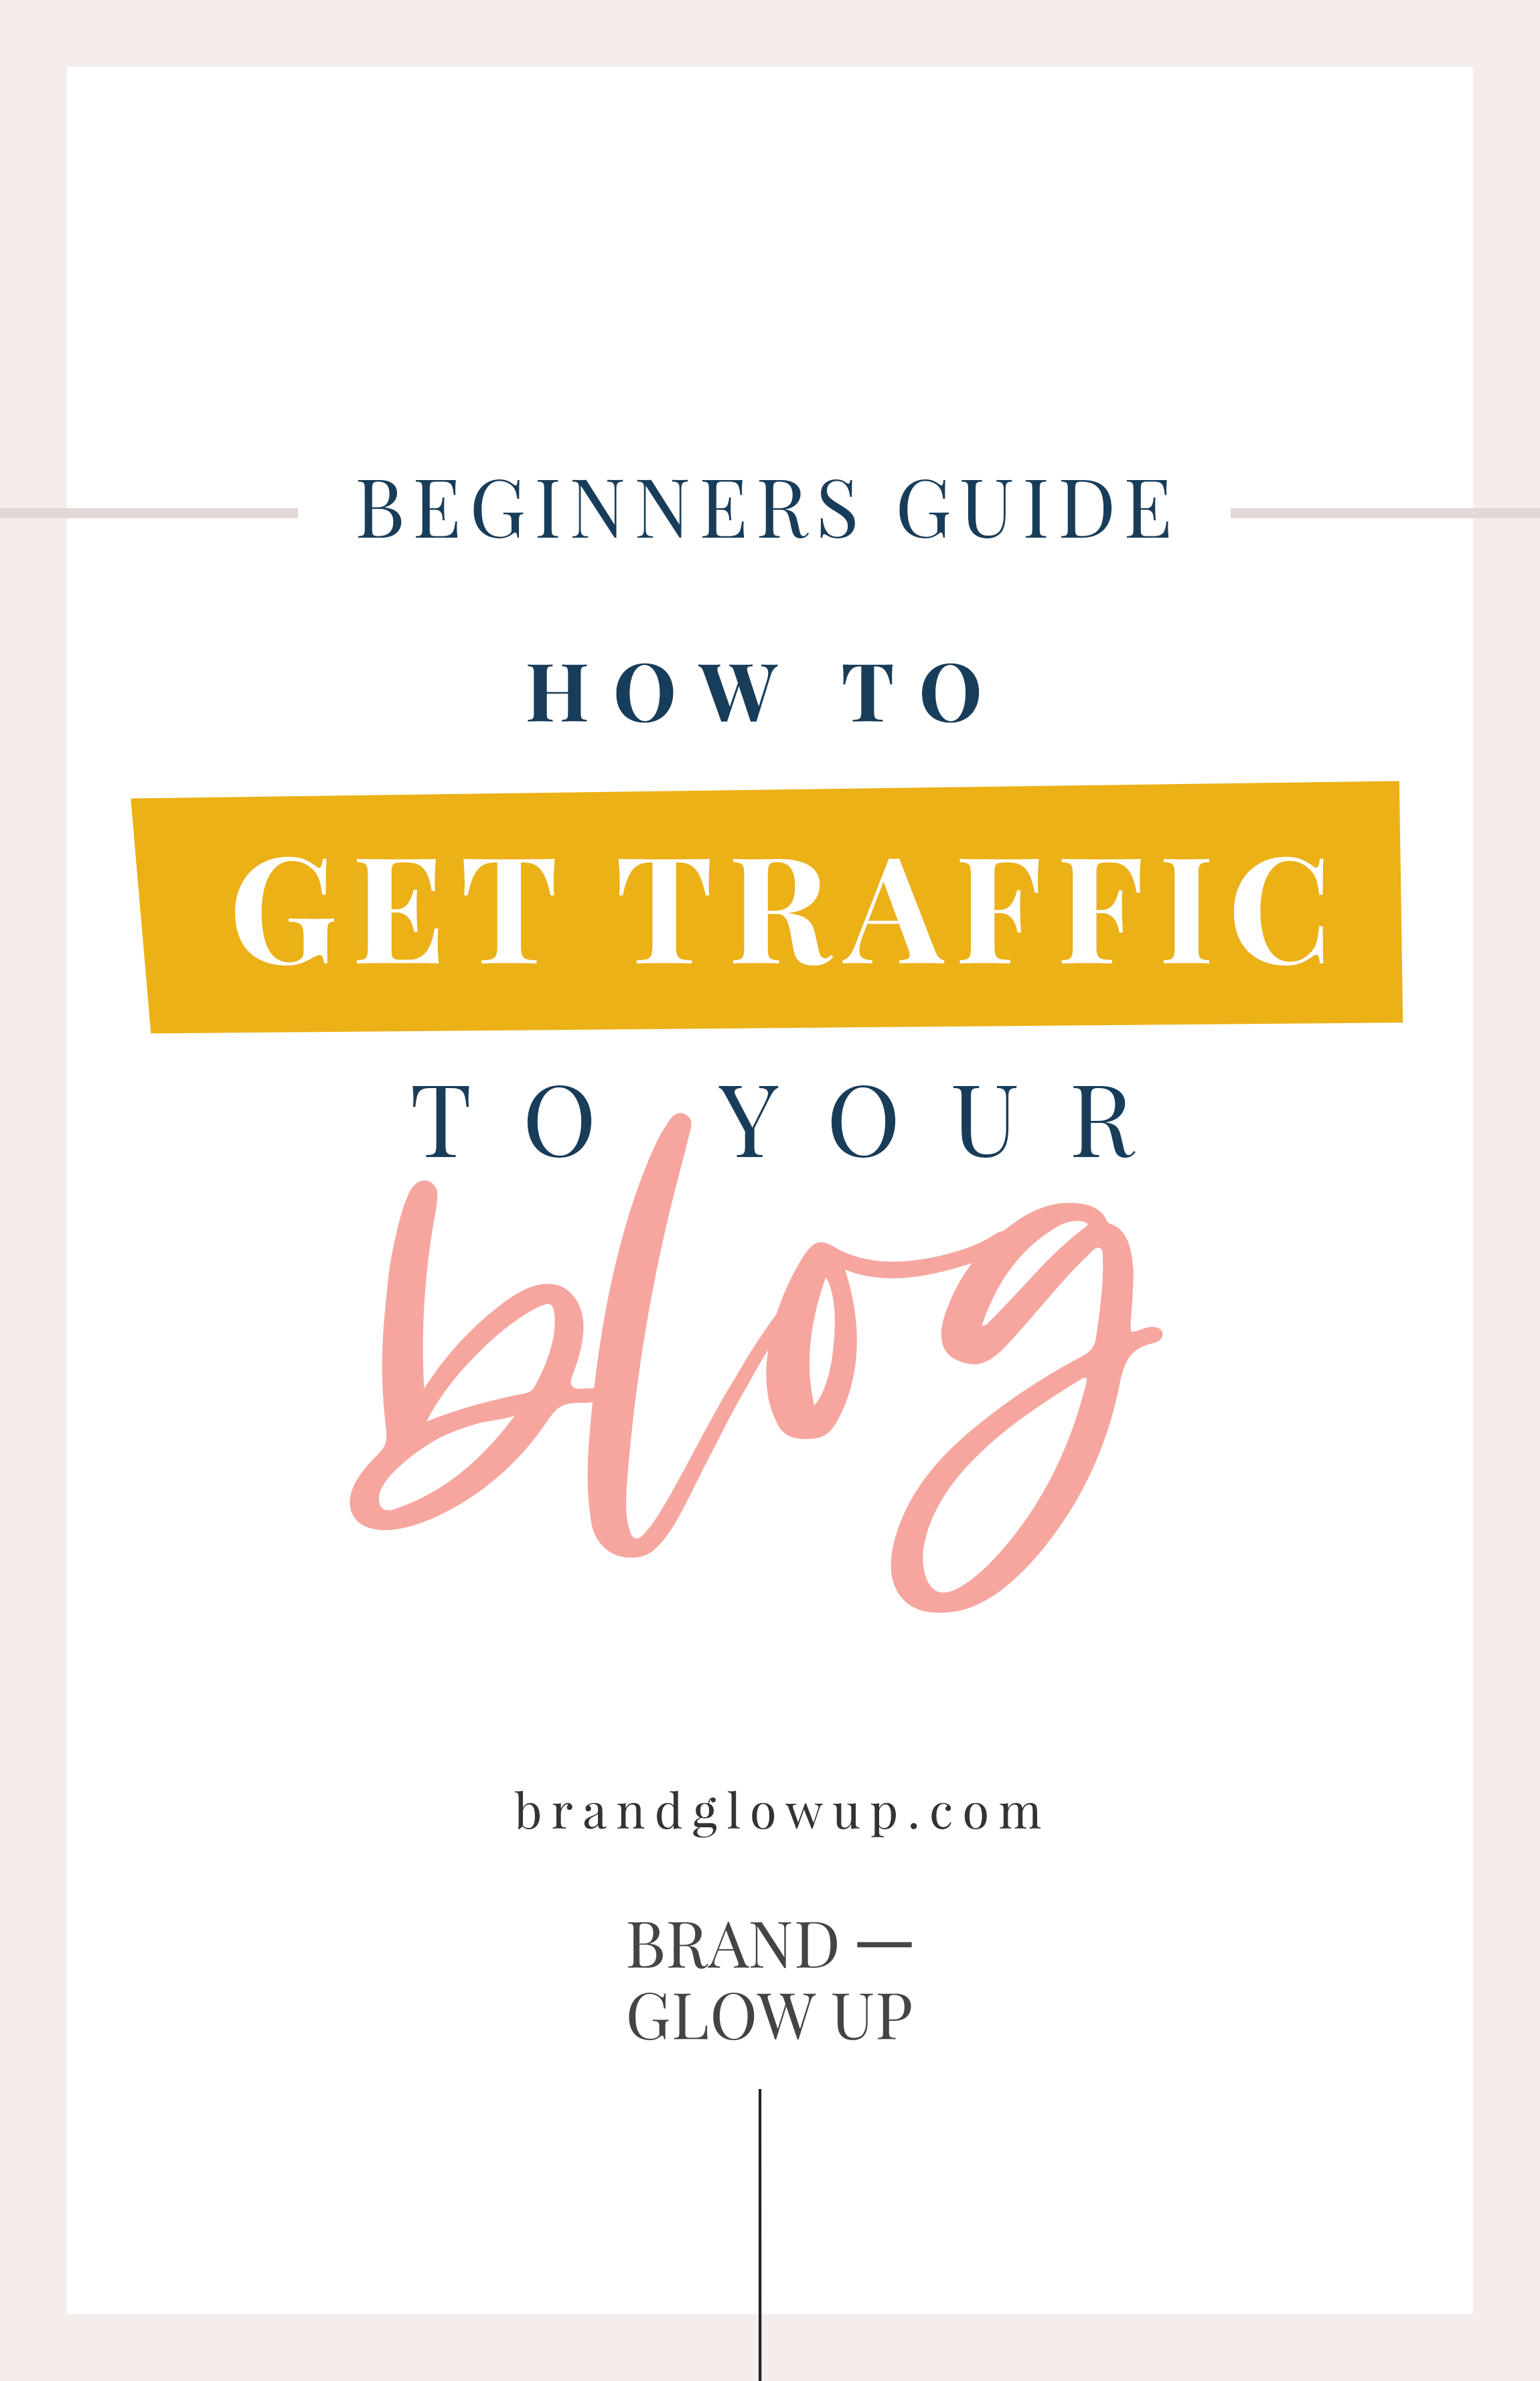 Get Traffic To Your Blog